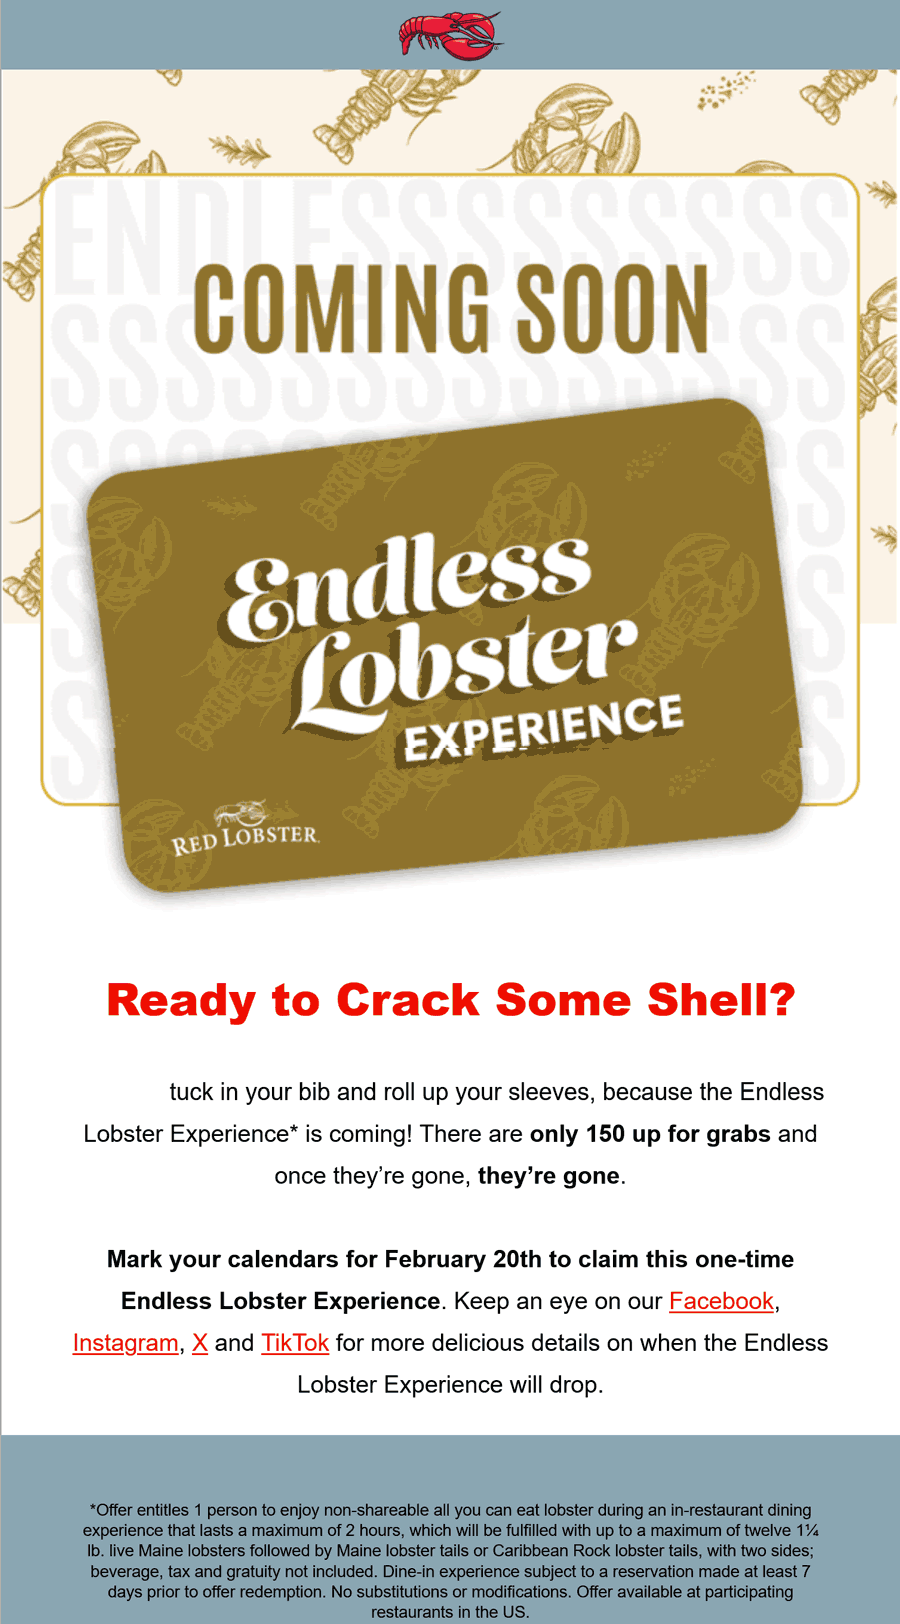 Red Lobster restaurants Coupon  150 cards up for grabs Tuesday for 2hrs of unlimited lobster at Red Lobster restaurants #redlobster 